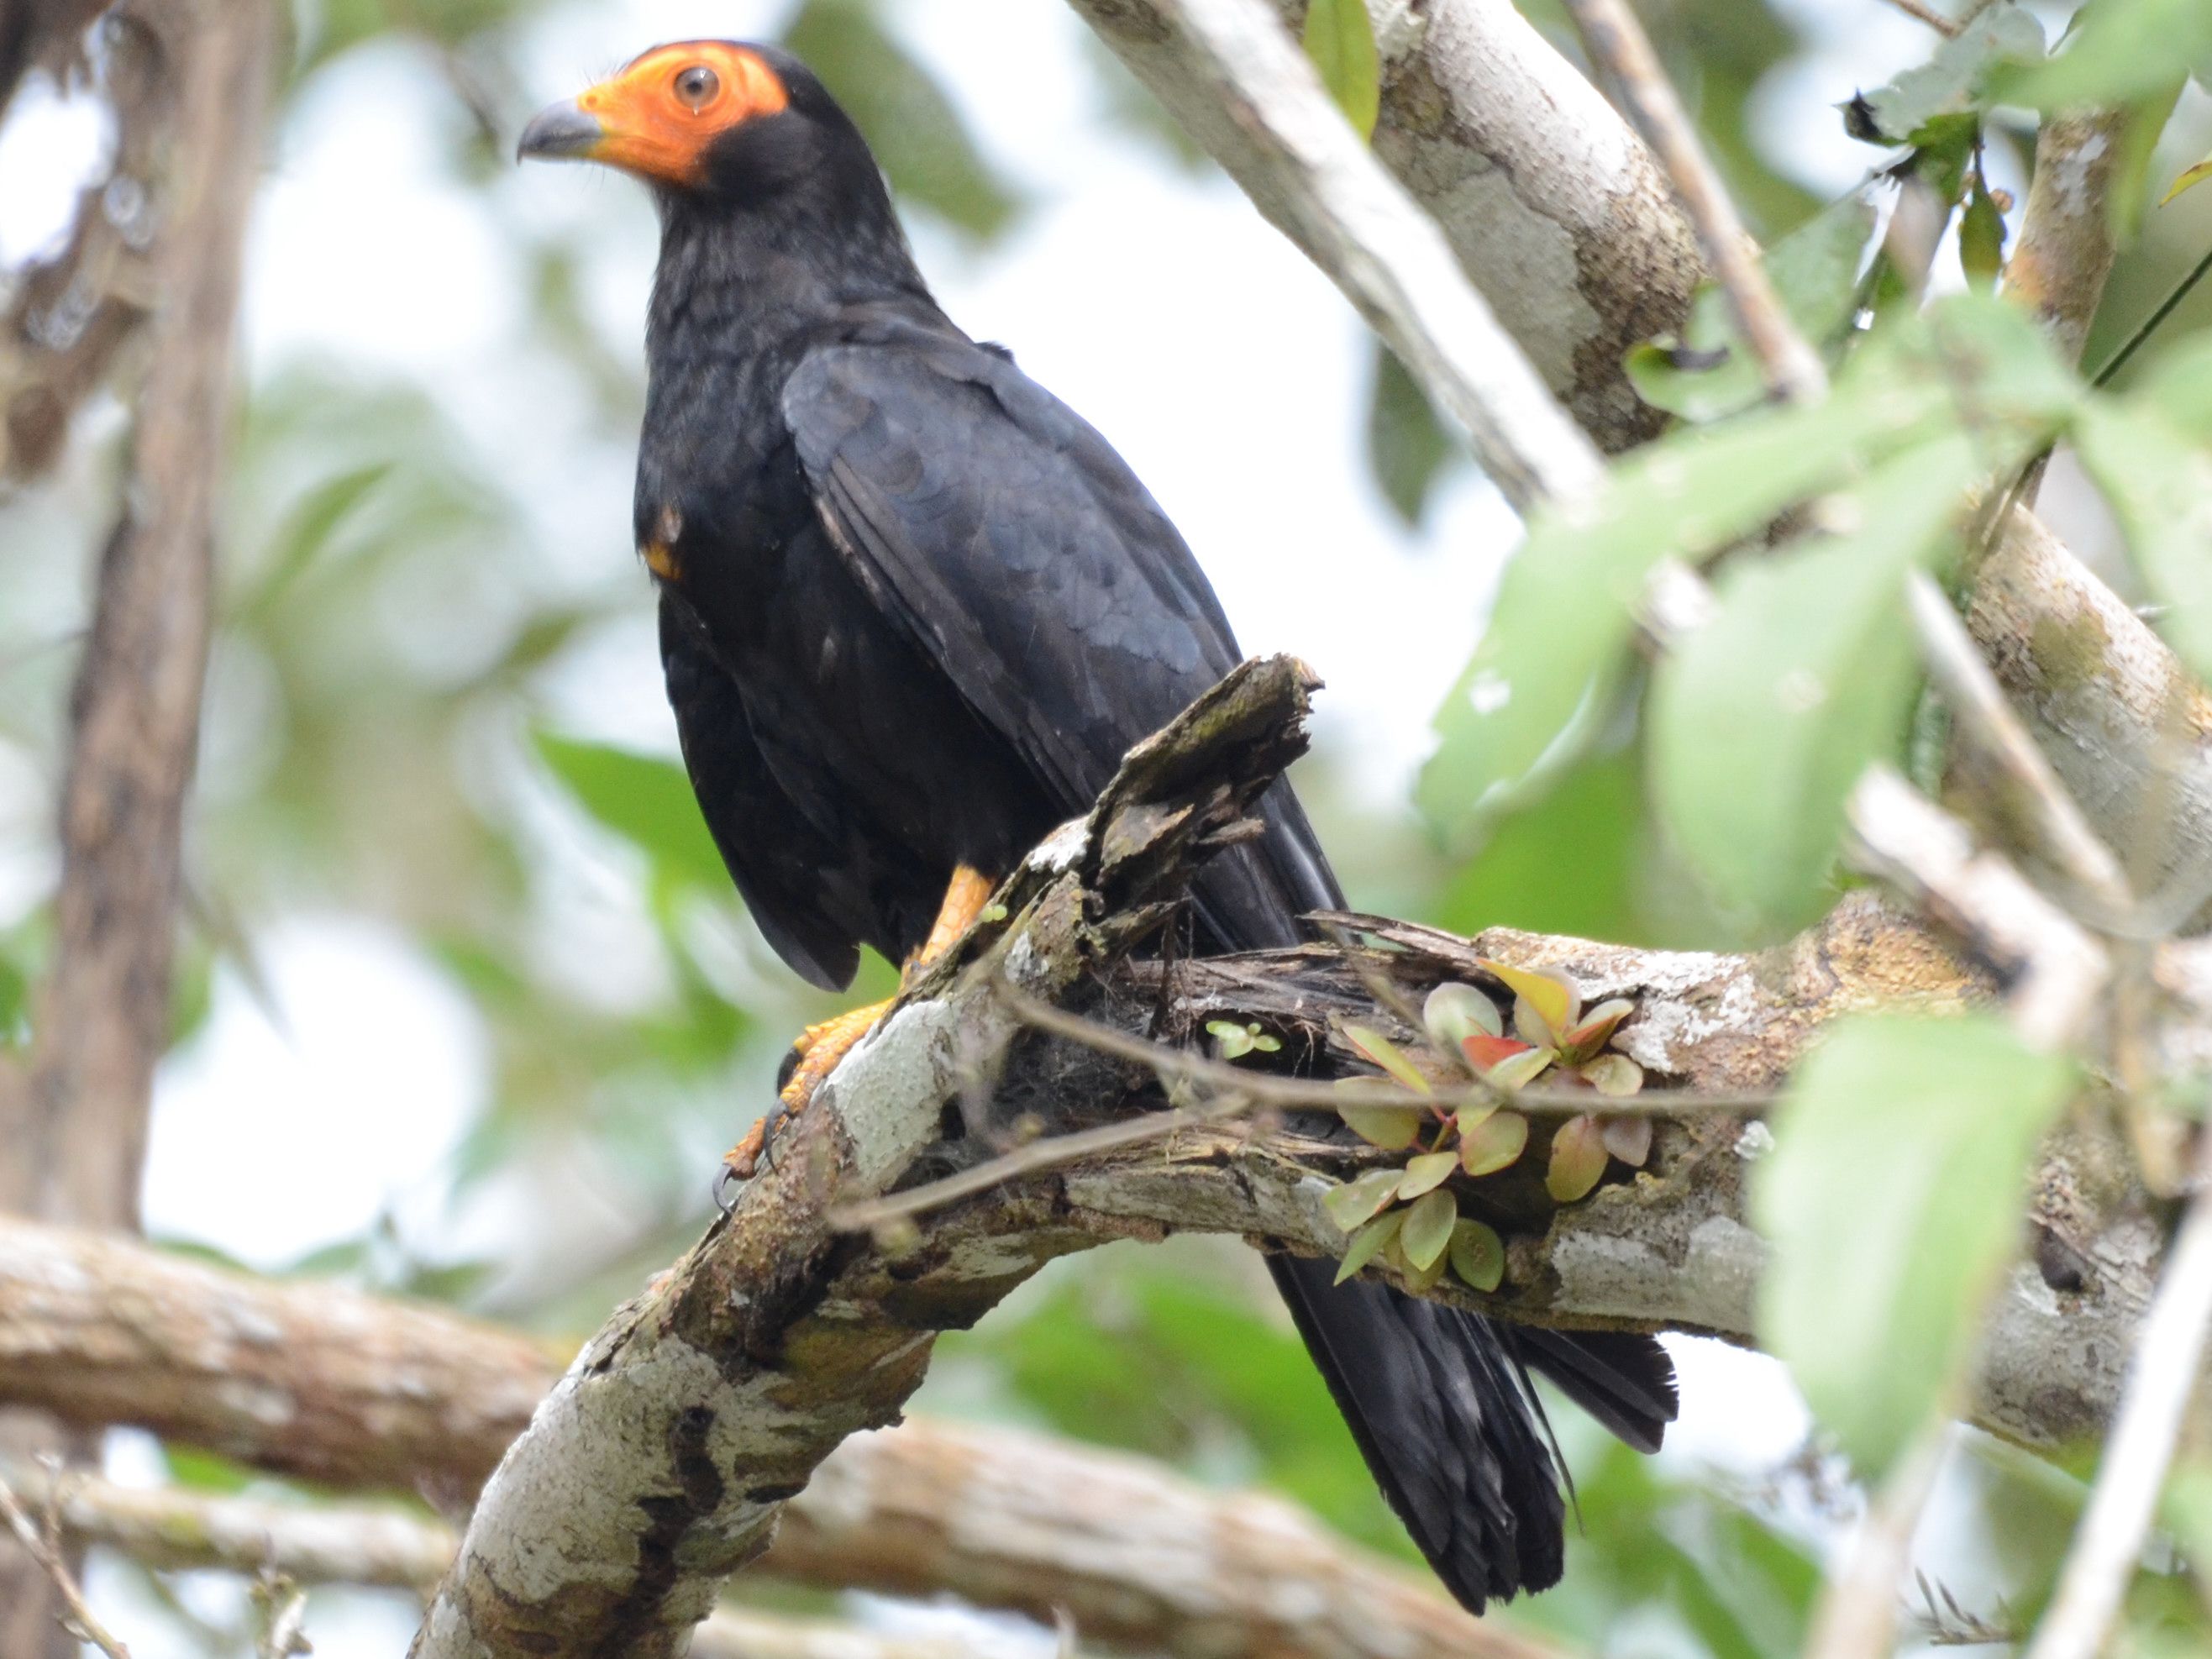 Click picture to see more Black Caracaras.